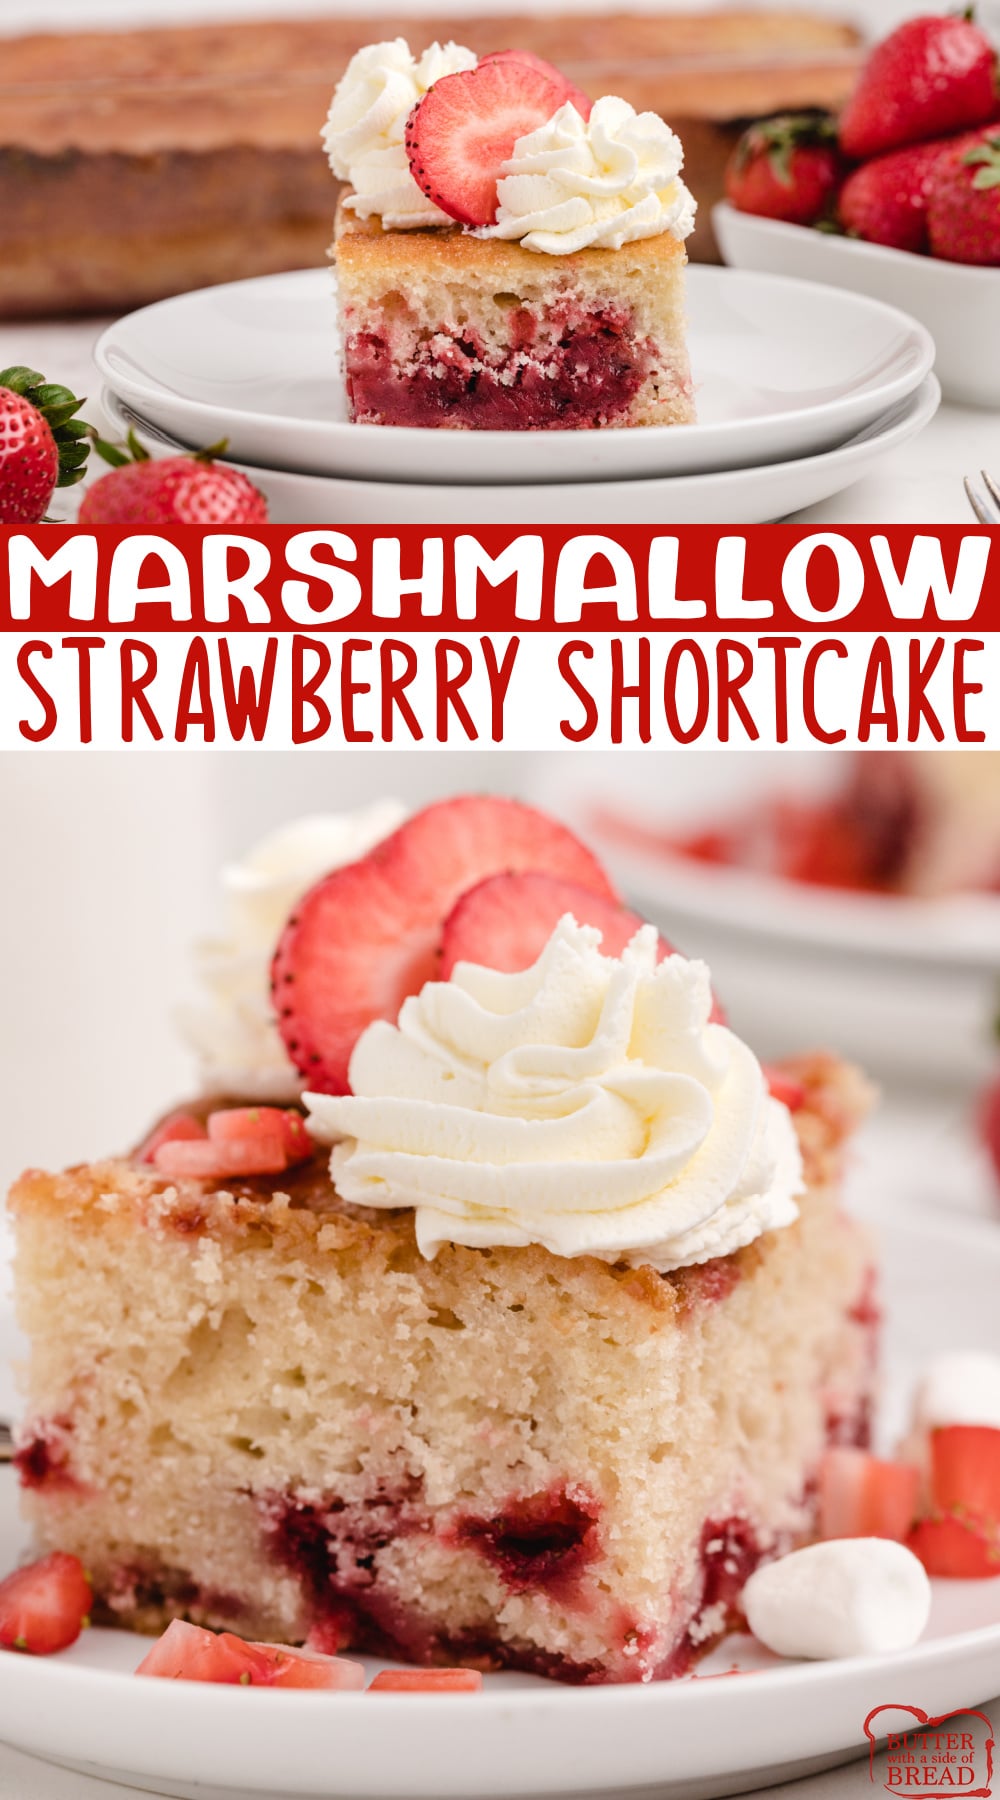 Marshmallow Strawberry Shortcake is made with marshmallows, frozen strawberries and strawberry jello! This simple strawberry shortcake recipe is made completely from scratch and the strawberries are baked right into it.